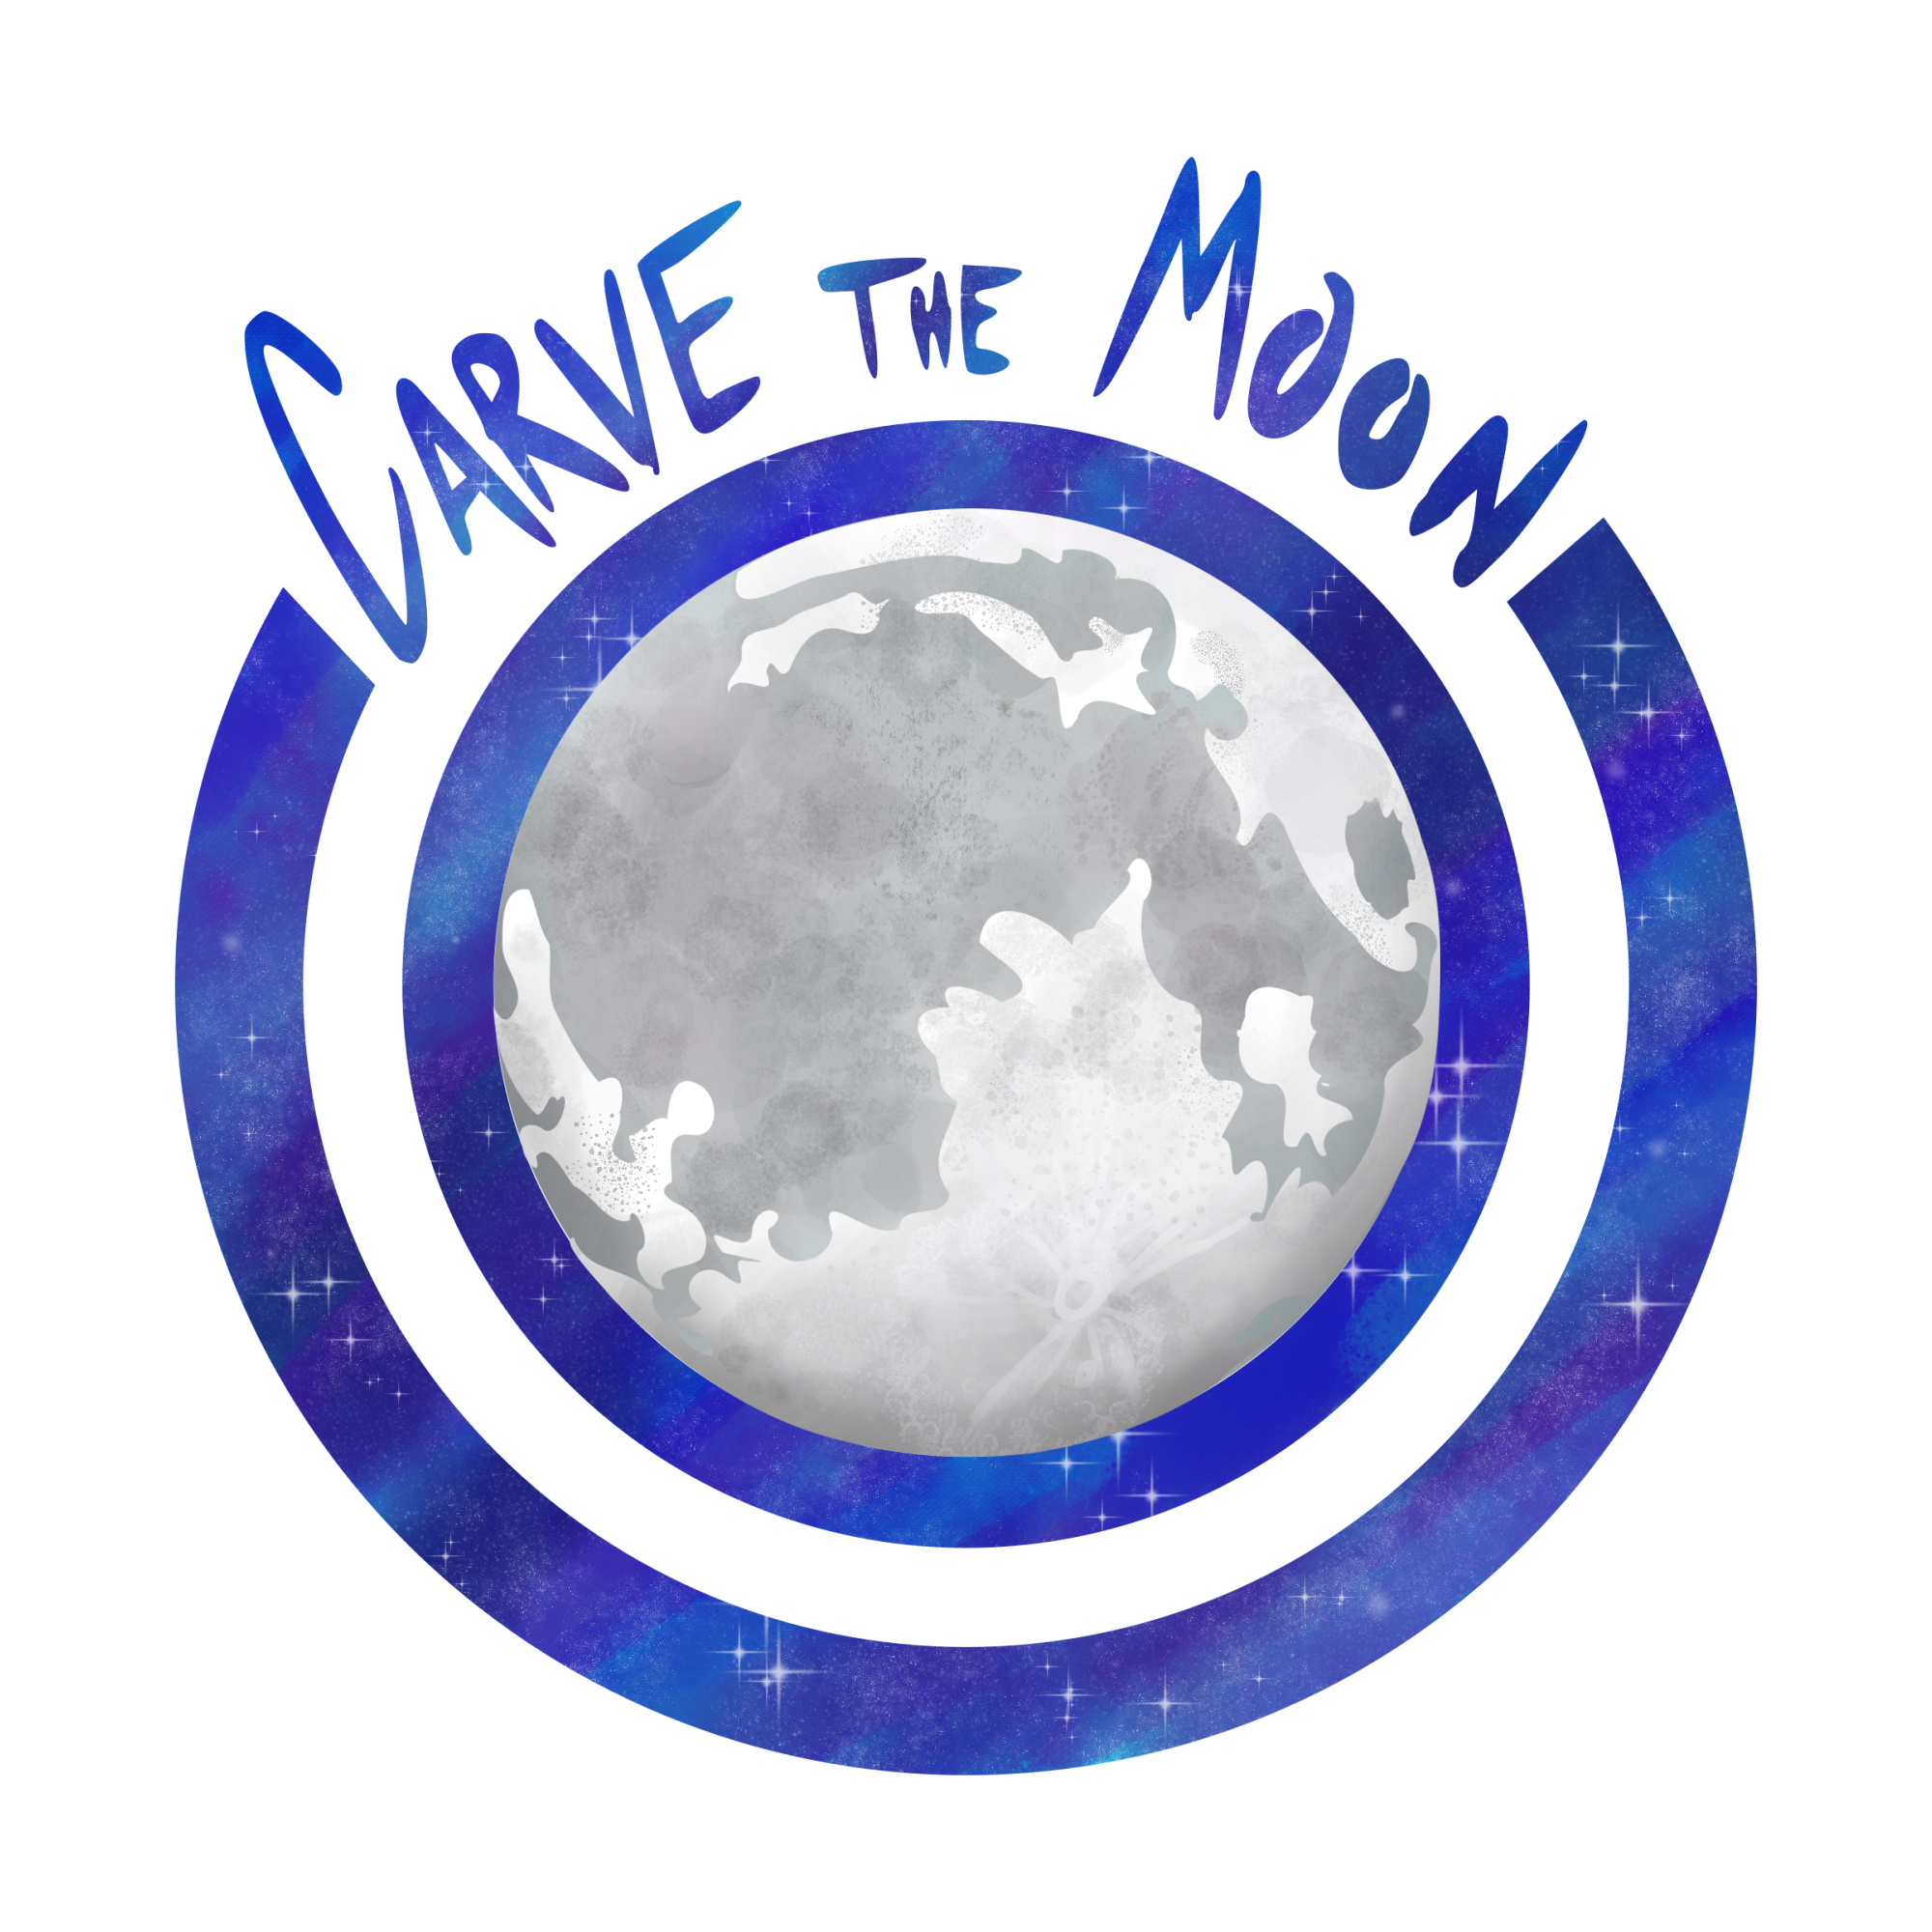 The words "Carve the Moon" circled around the moon